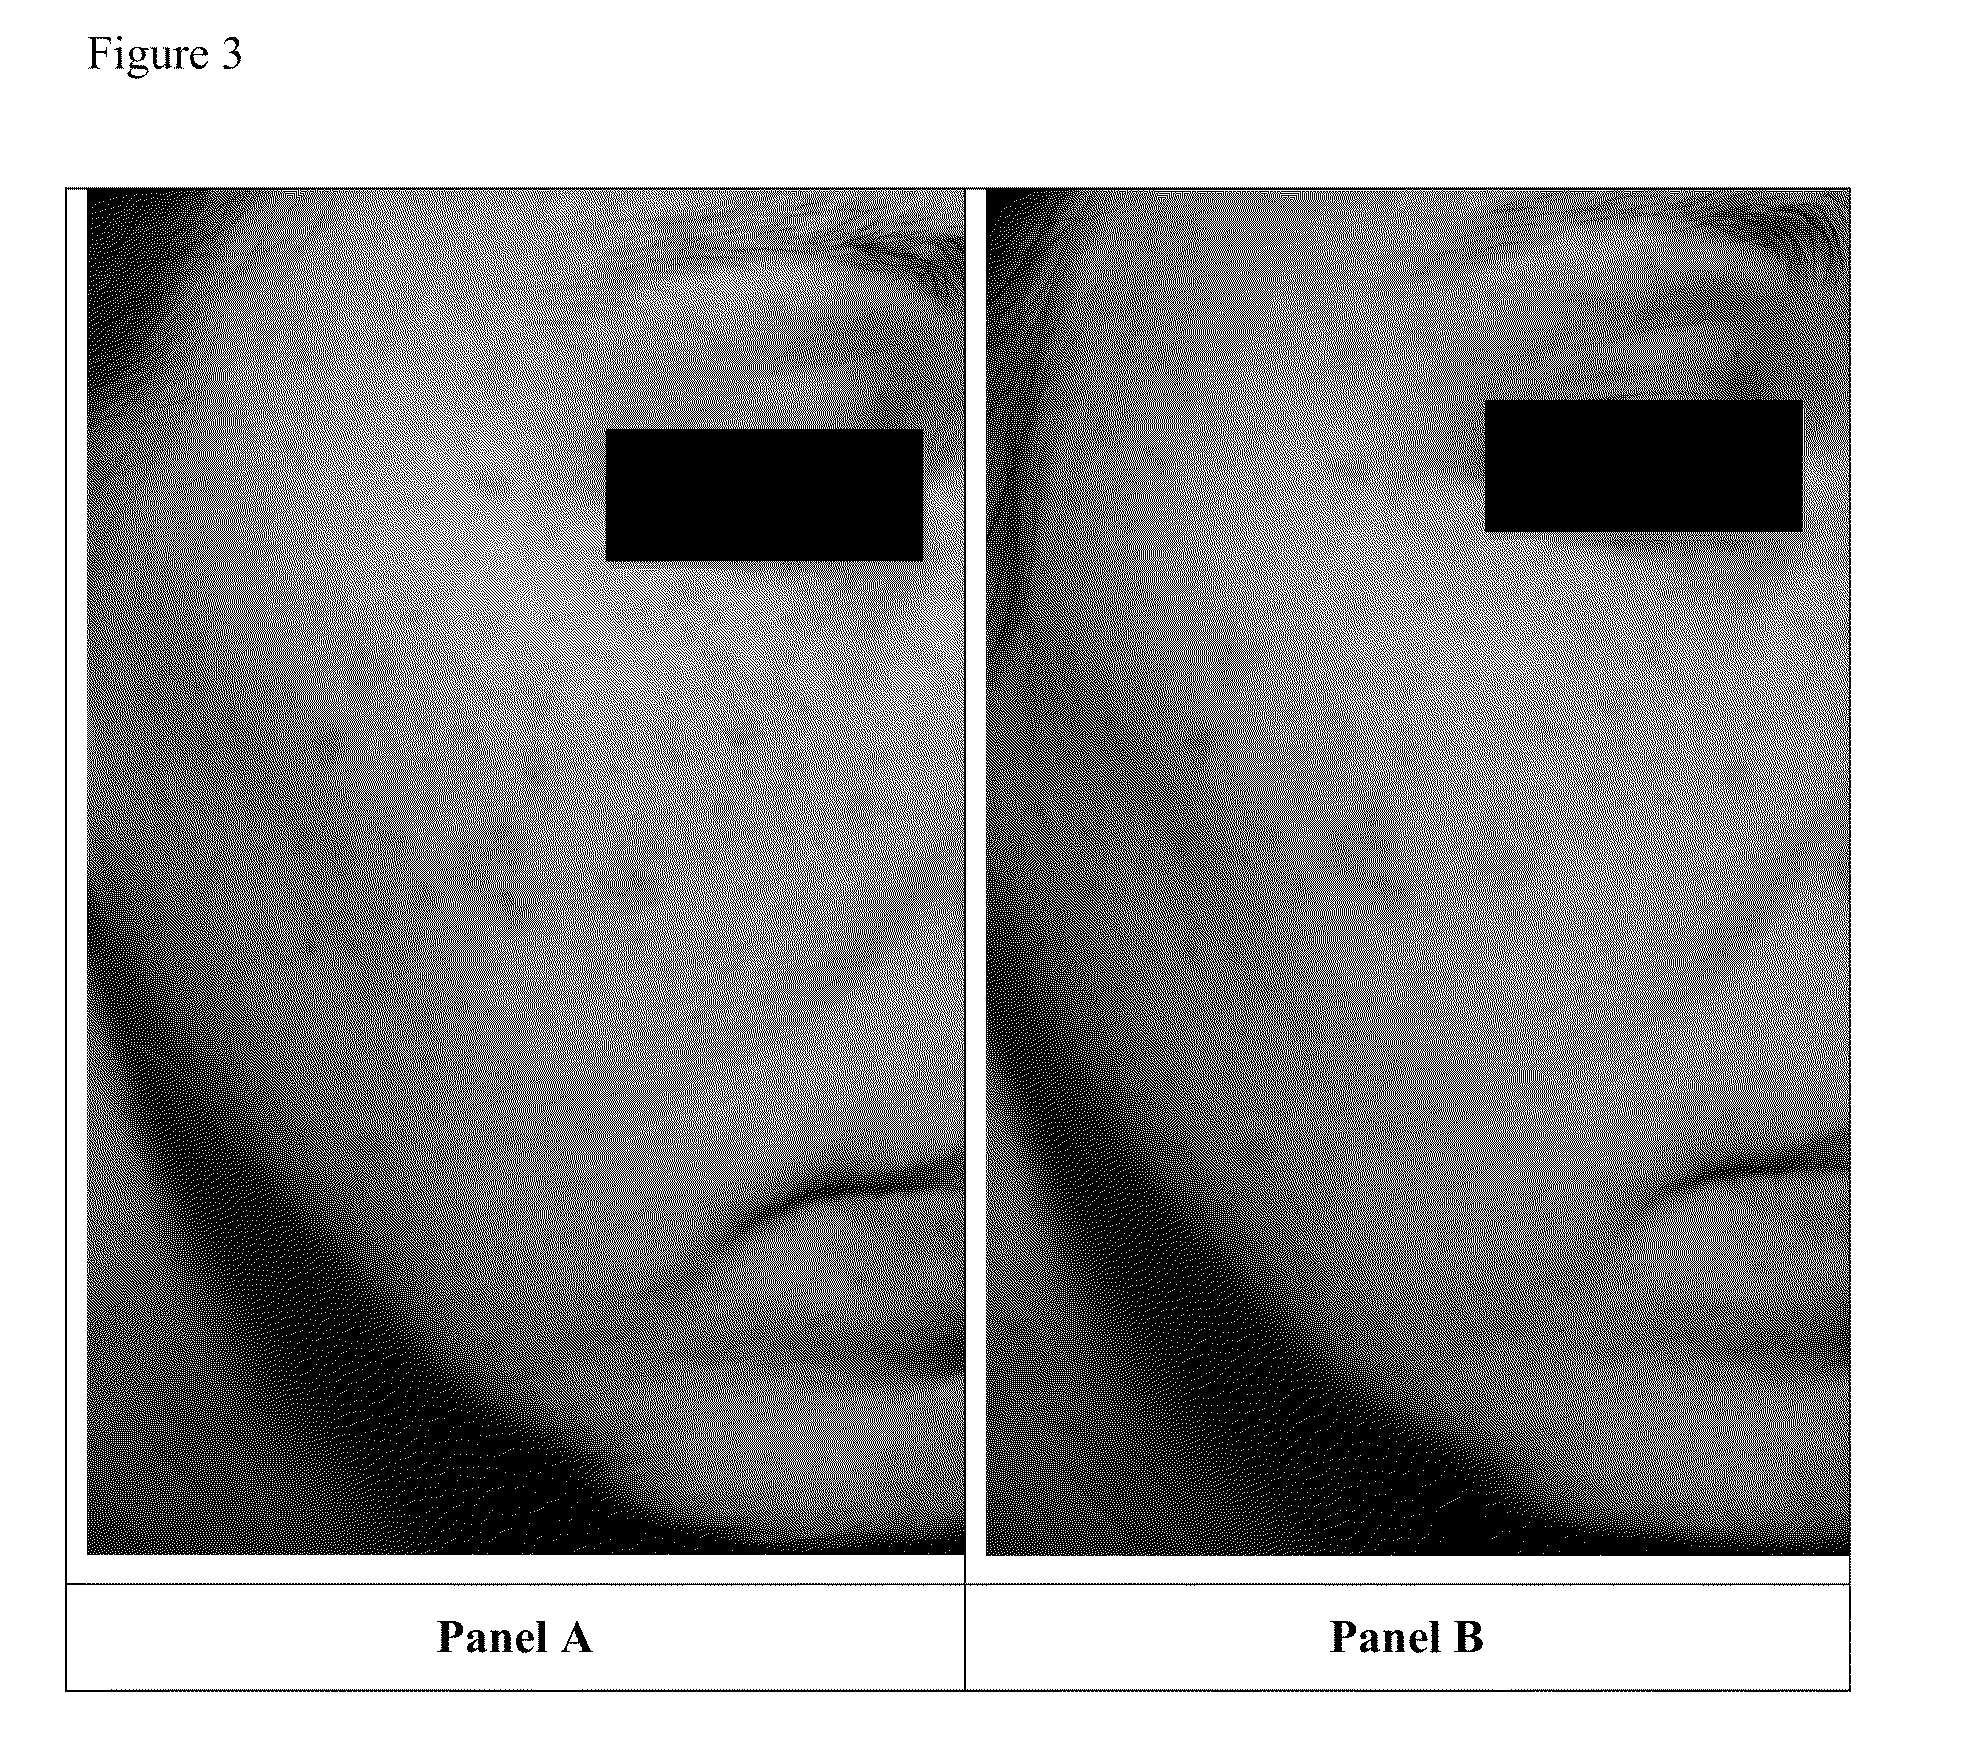 Calcium sequestration compositions and methods of treating skin pigmentation disorders and conditions